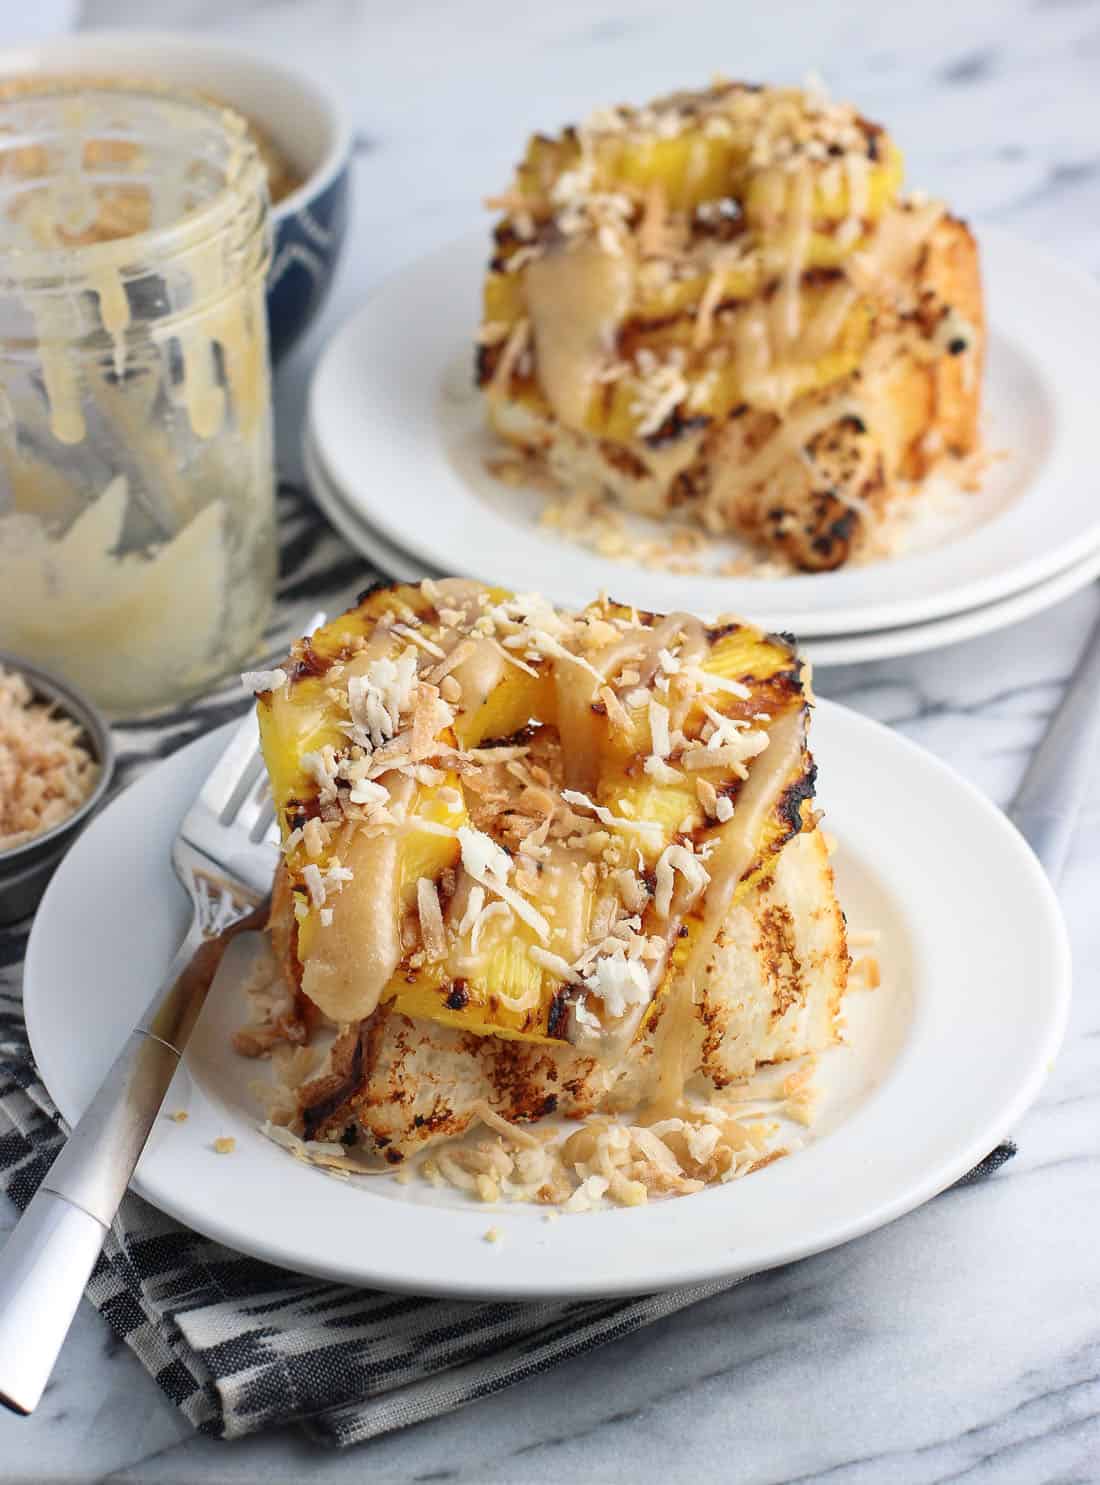 Cake topped with pineapple, coconut, and caramel on plates with a fork.